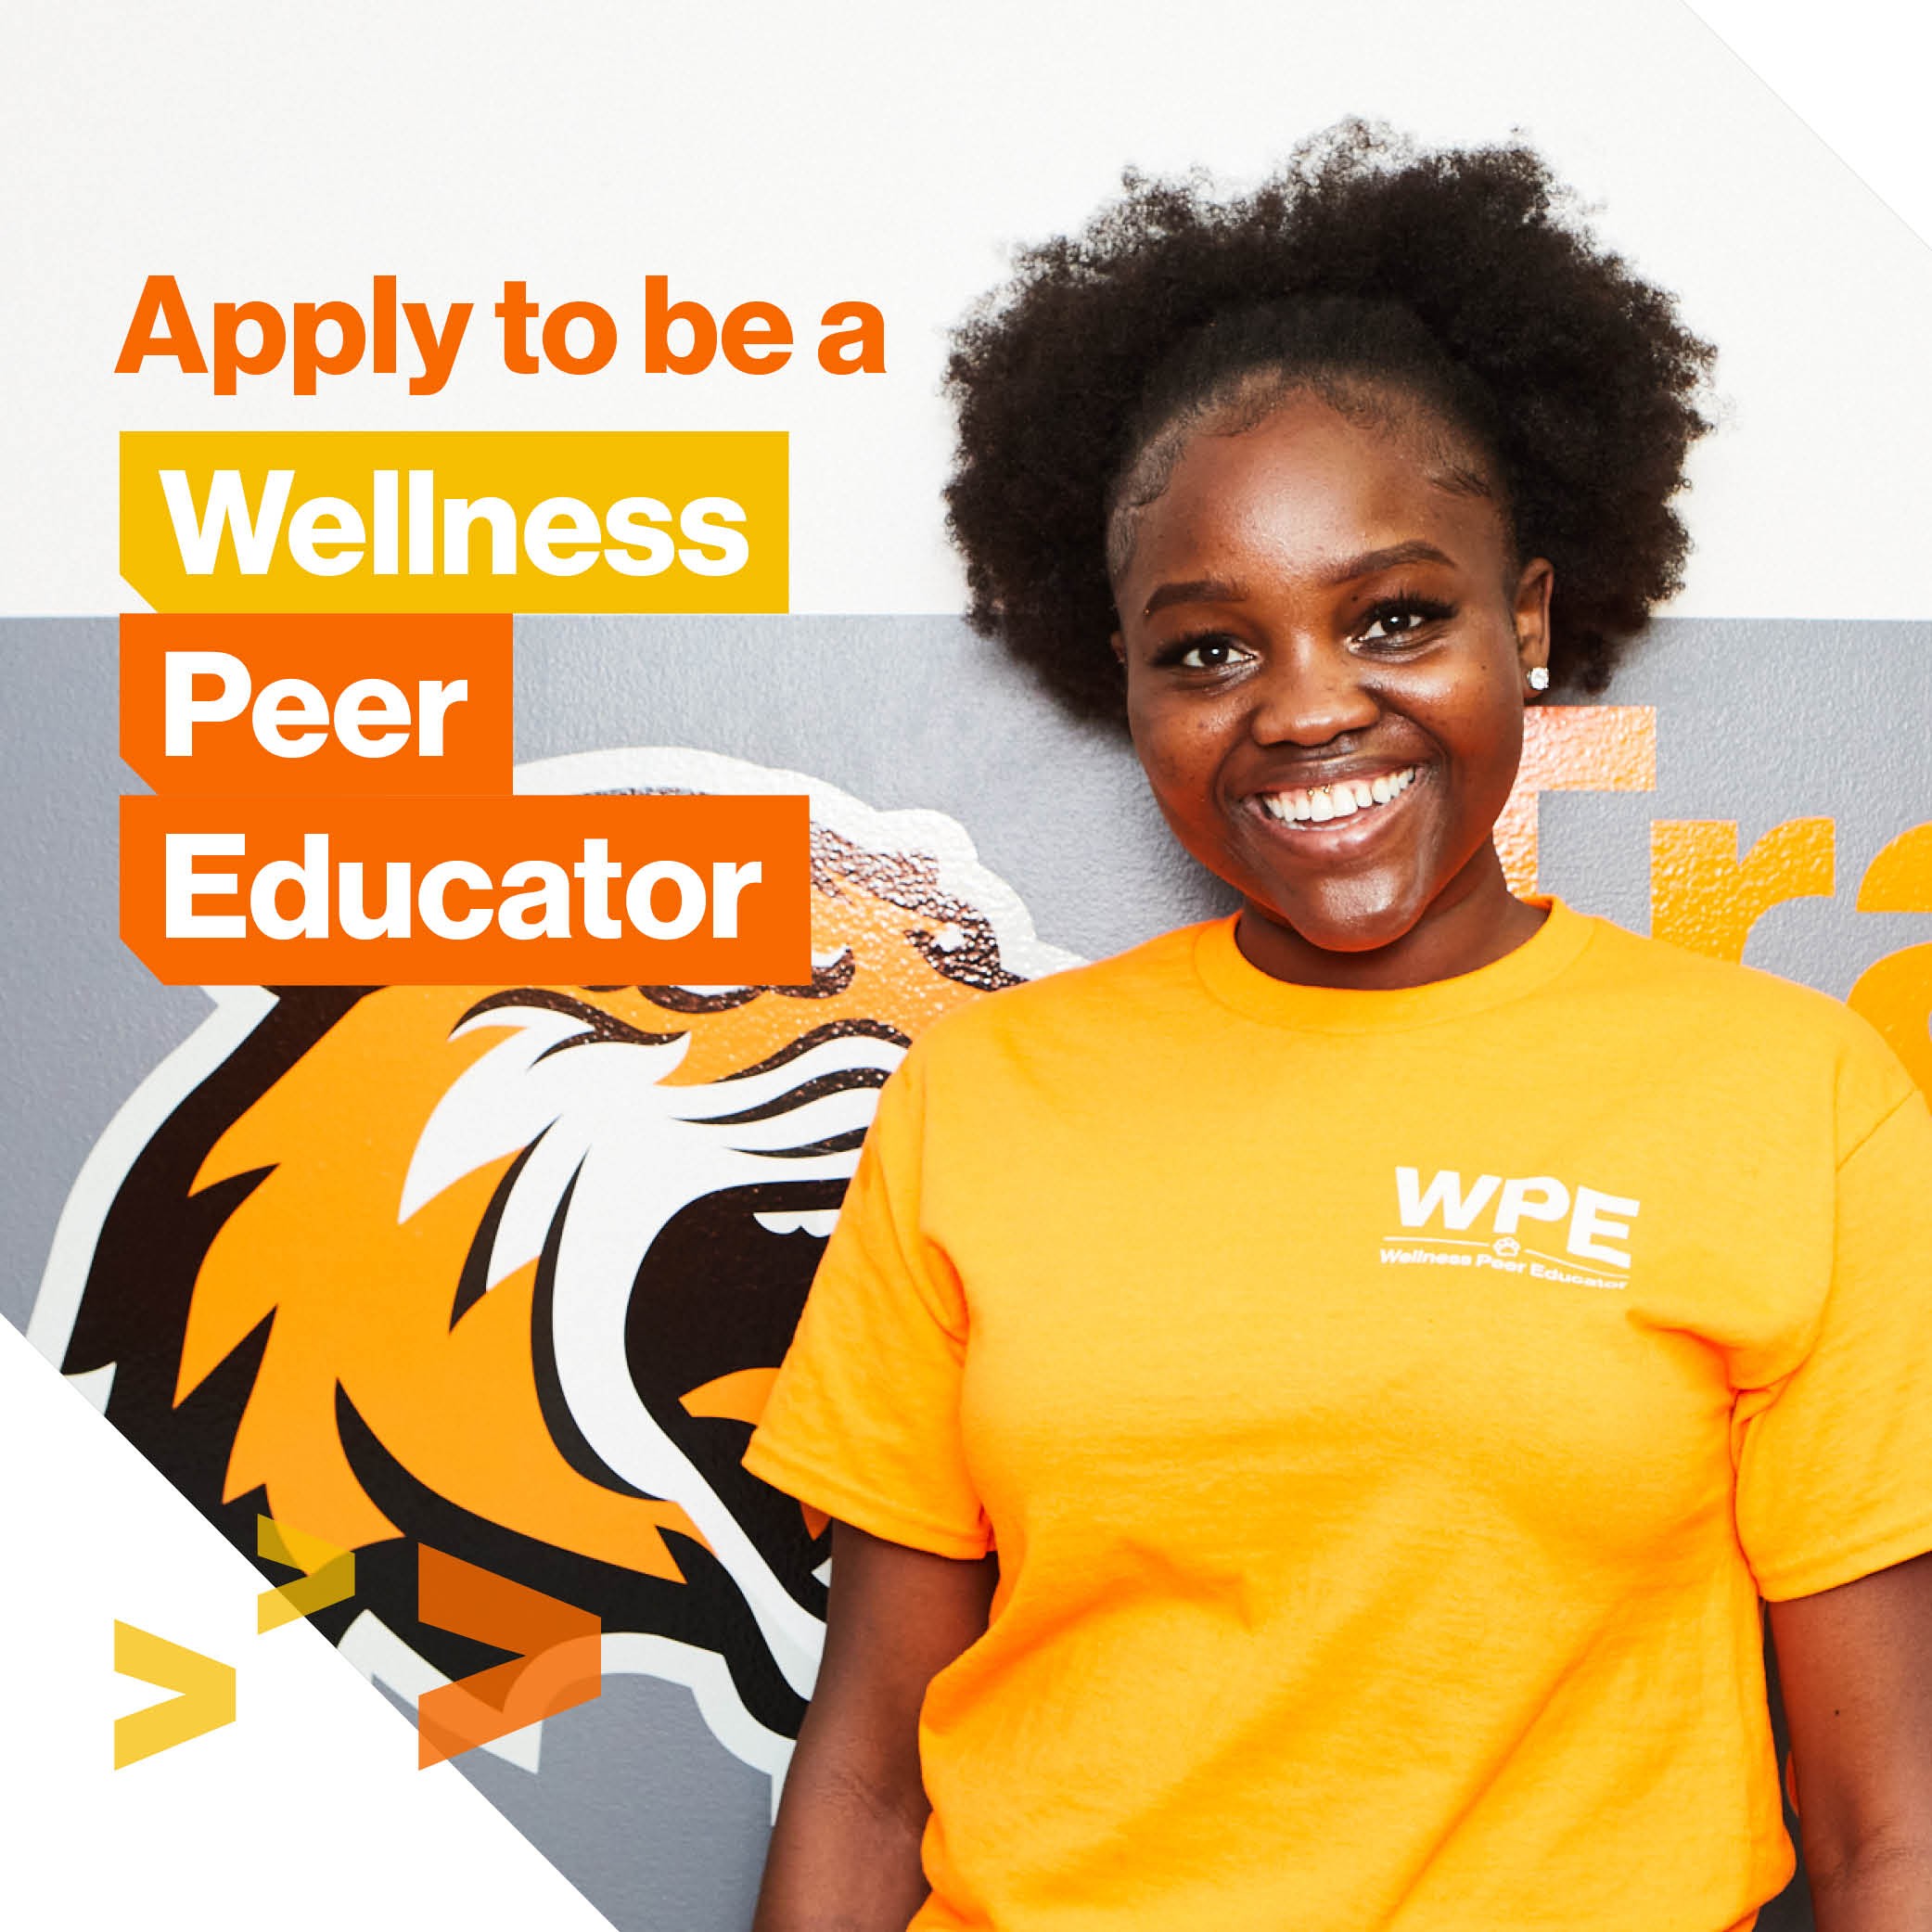 Apply to be a wellness peer educator text overlaid on a picture of a student